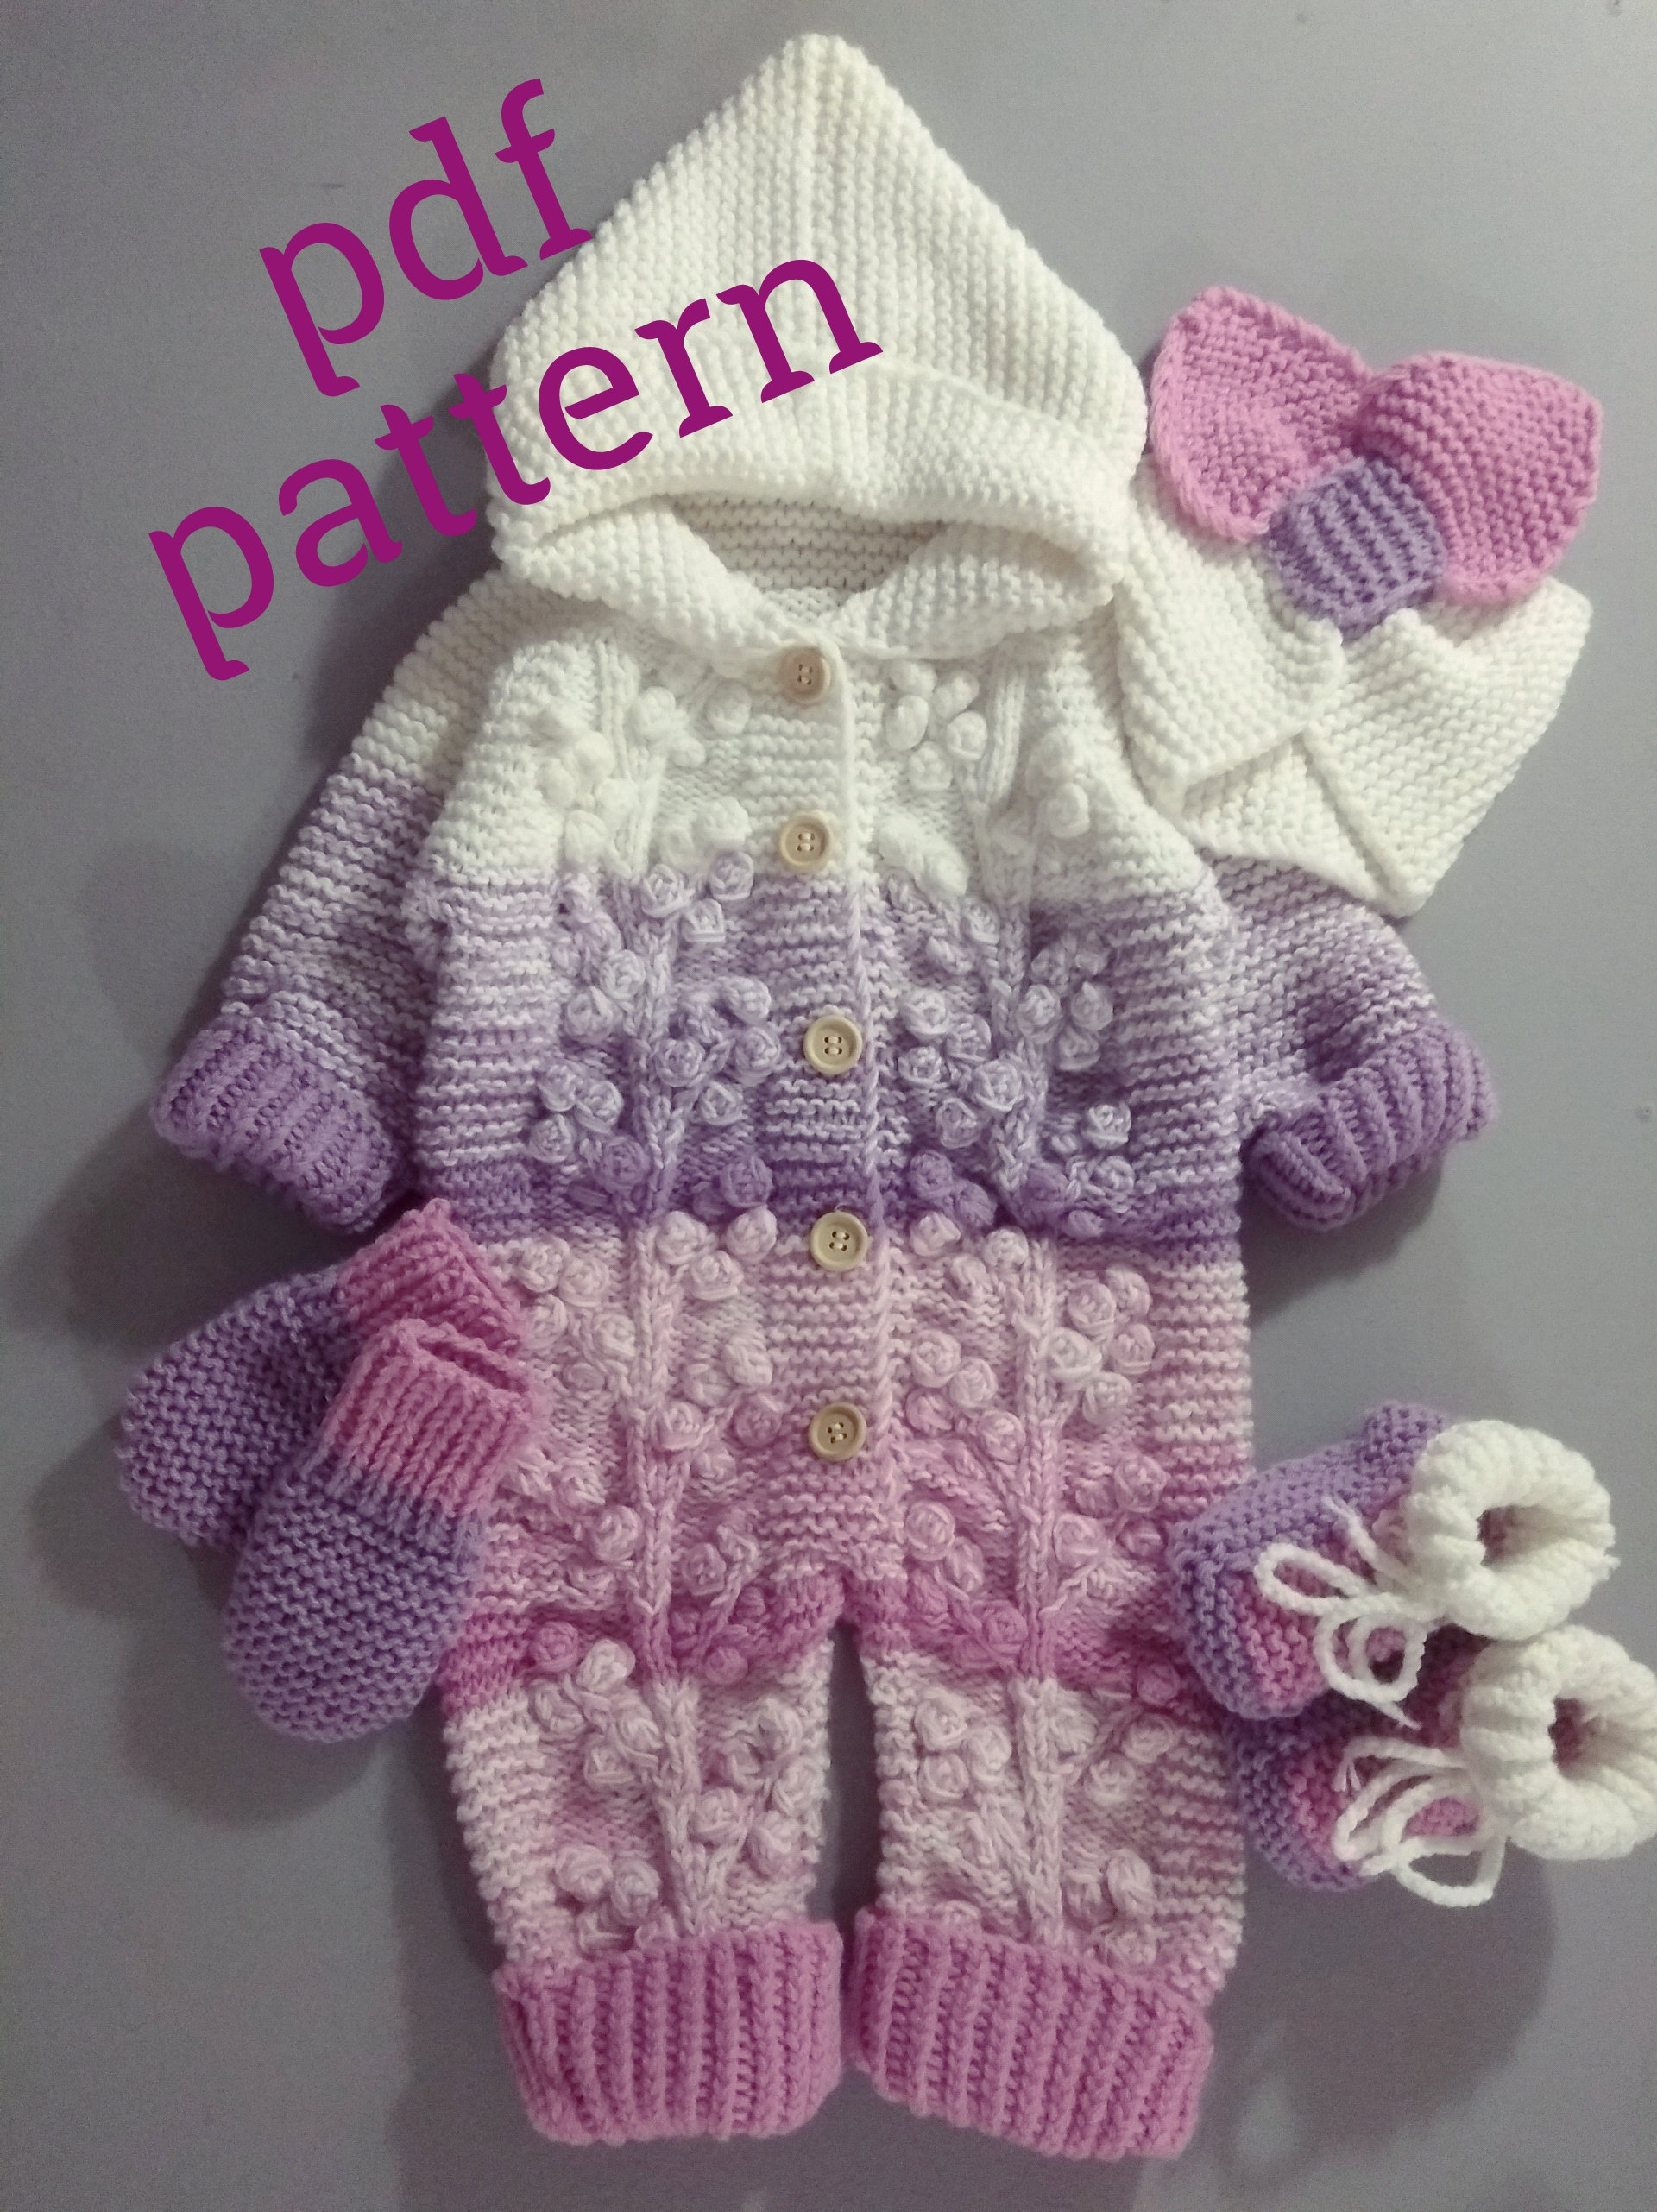 Knitting pattern for jumpsuit knit baby romper 6-9 months | Etsy